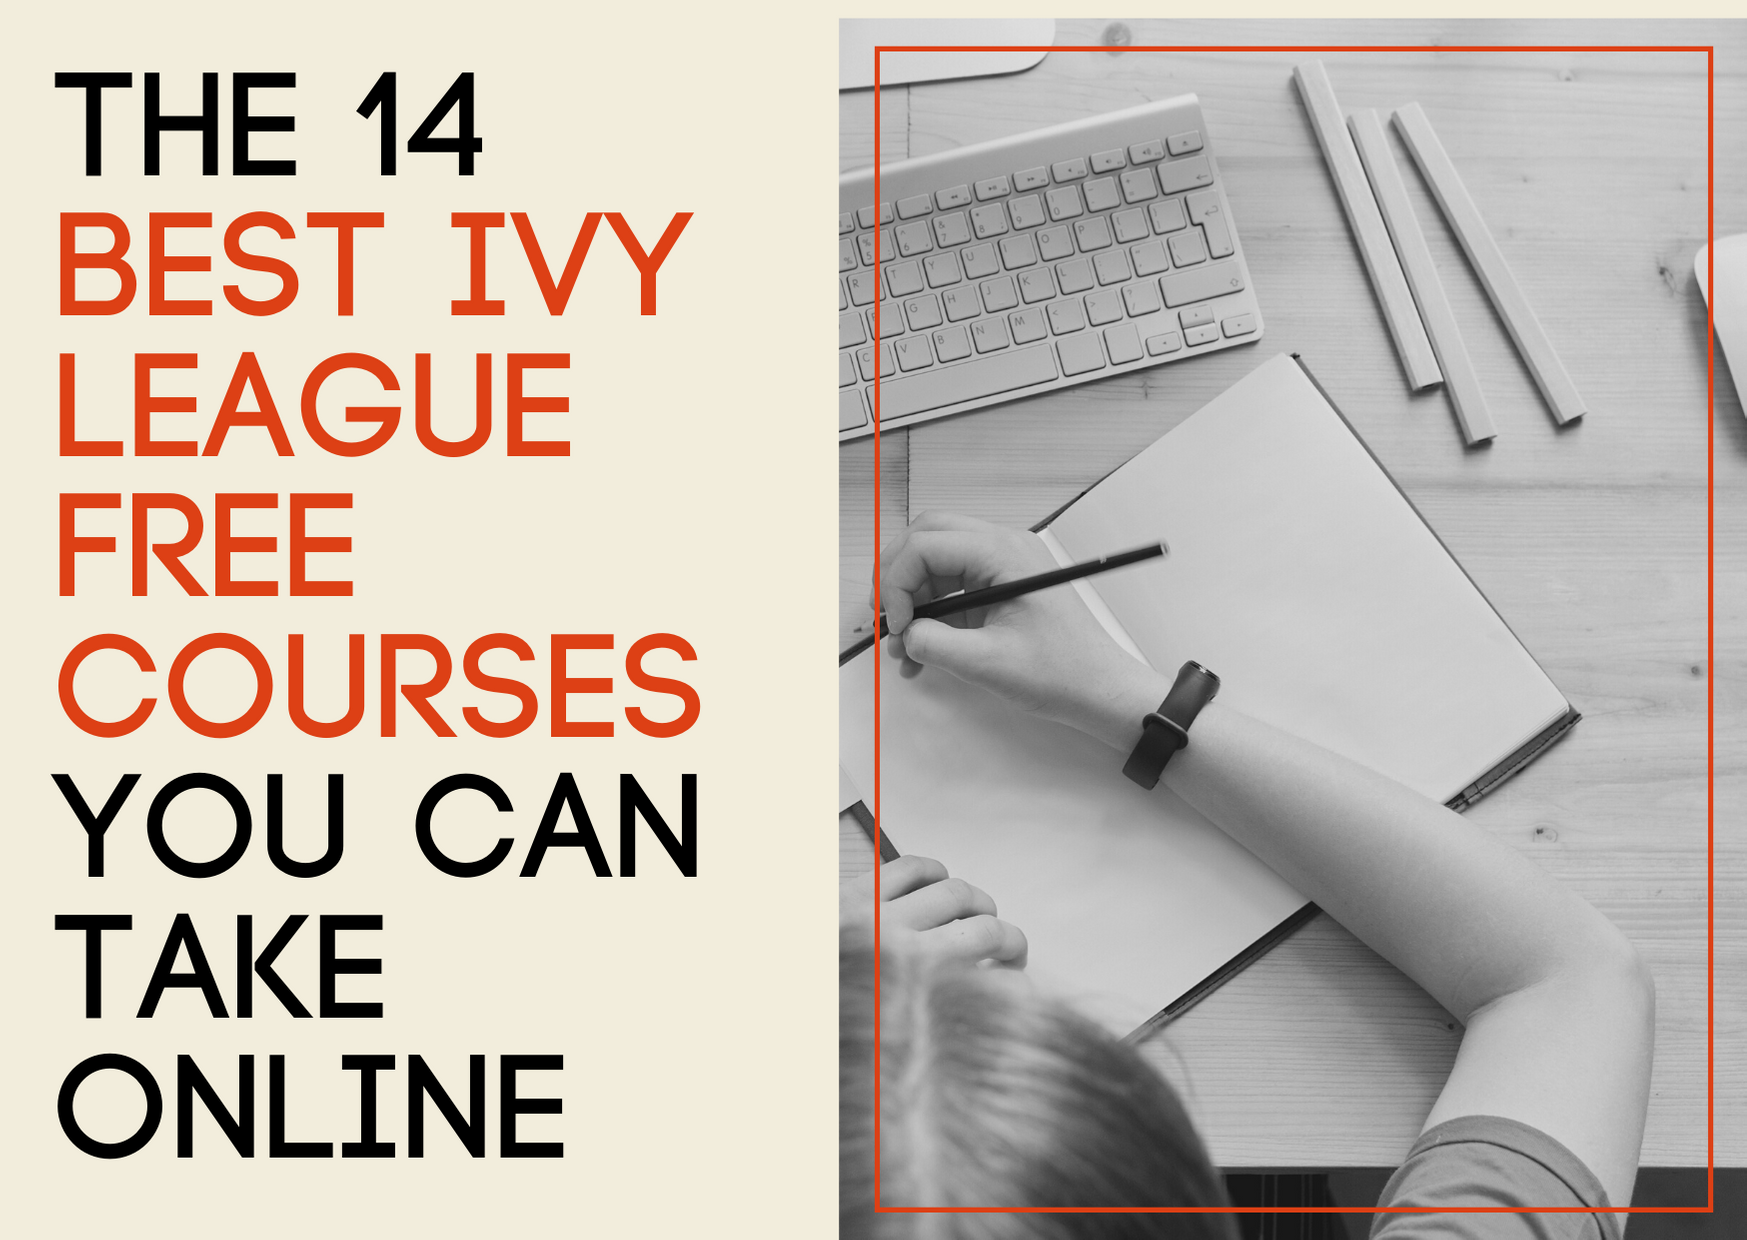 500 Free Online Courses From Ivy League Schools That Will Make You Smarter  (and Less Stir Crazy)